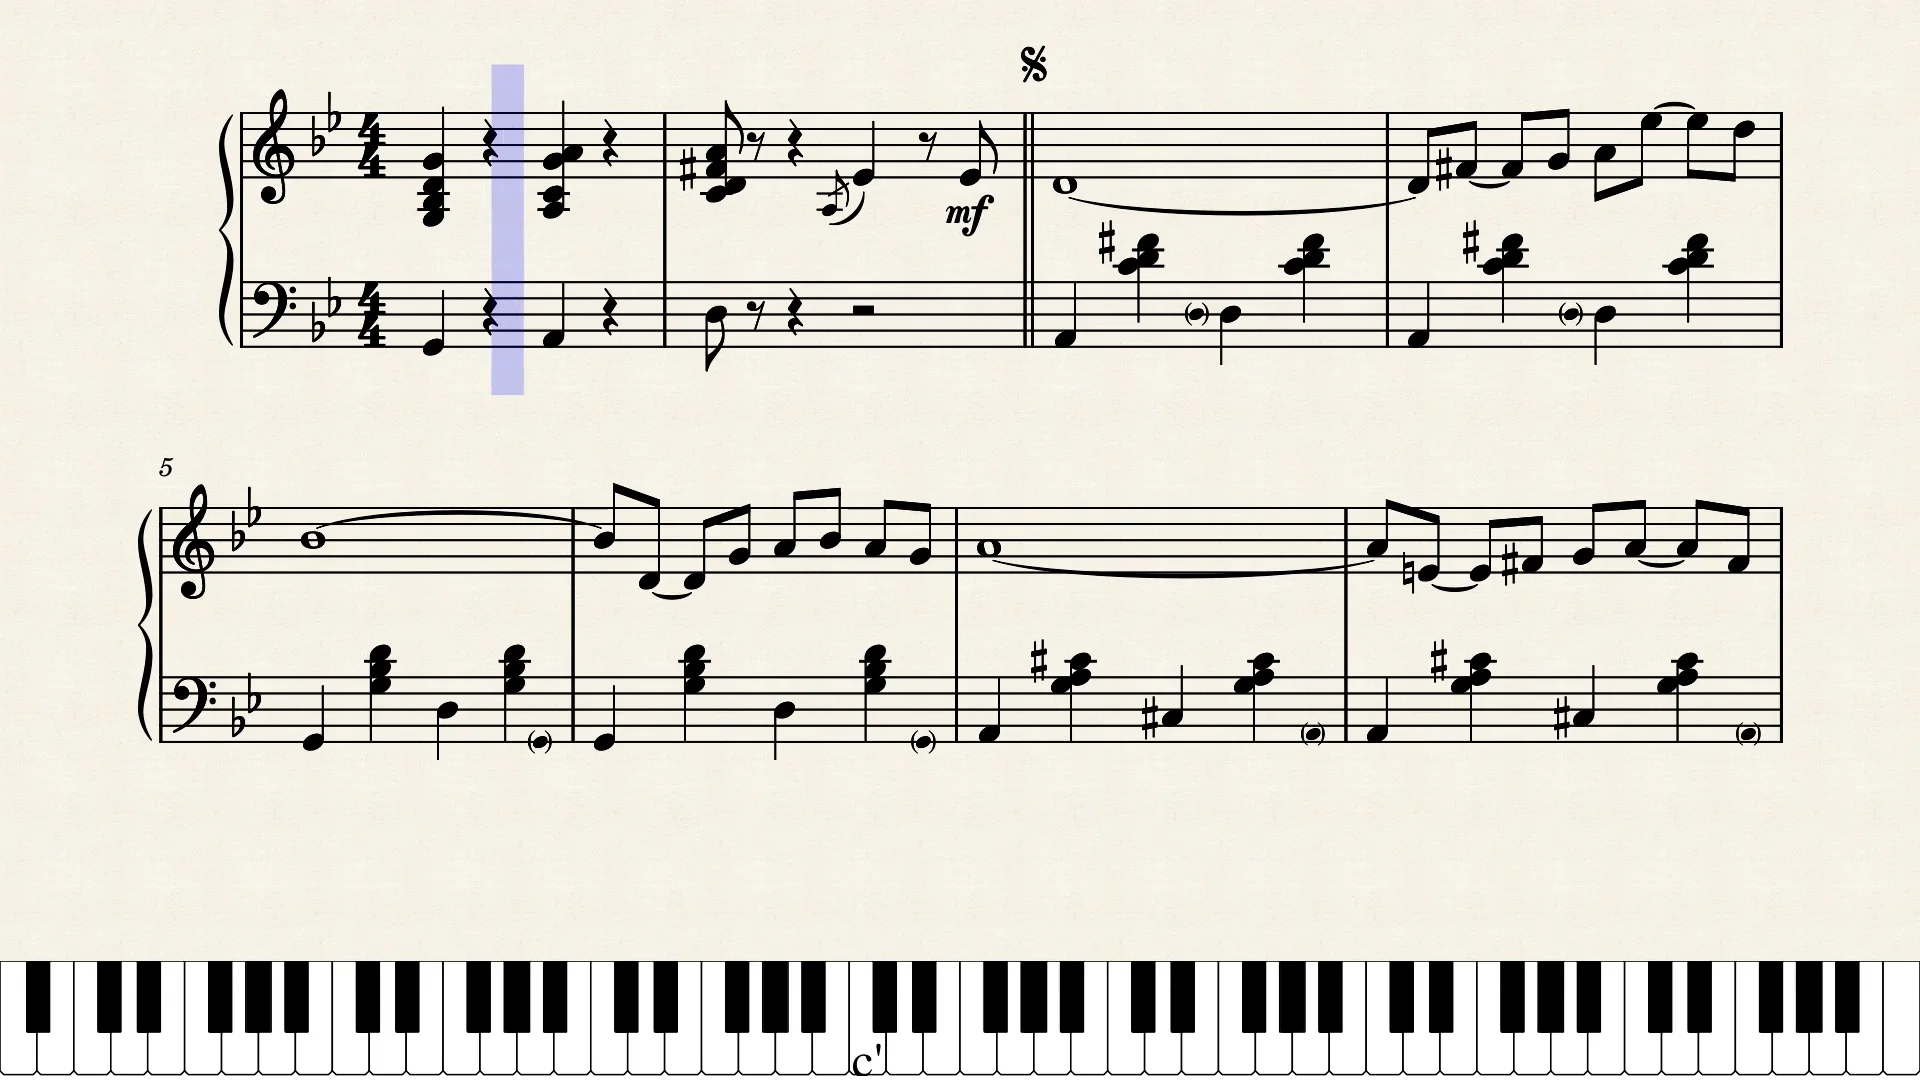 Sidney Bechet - Petite Fleur (piano solo ver. with sheet music).mp4 on Vimeo